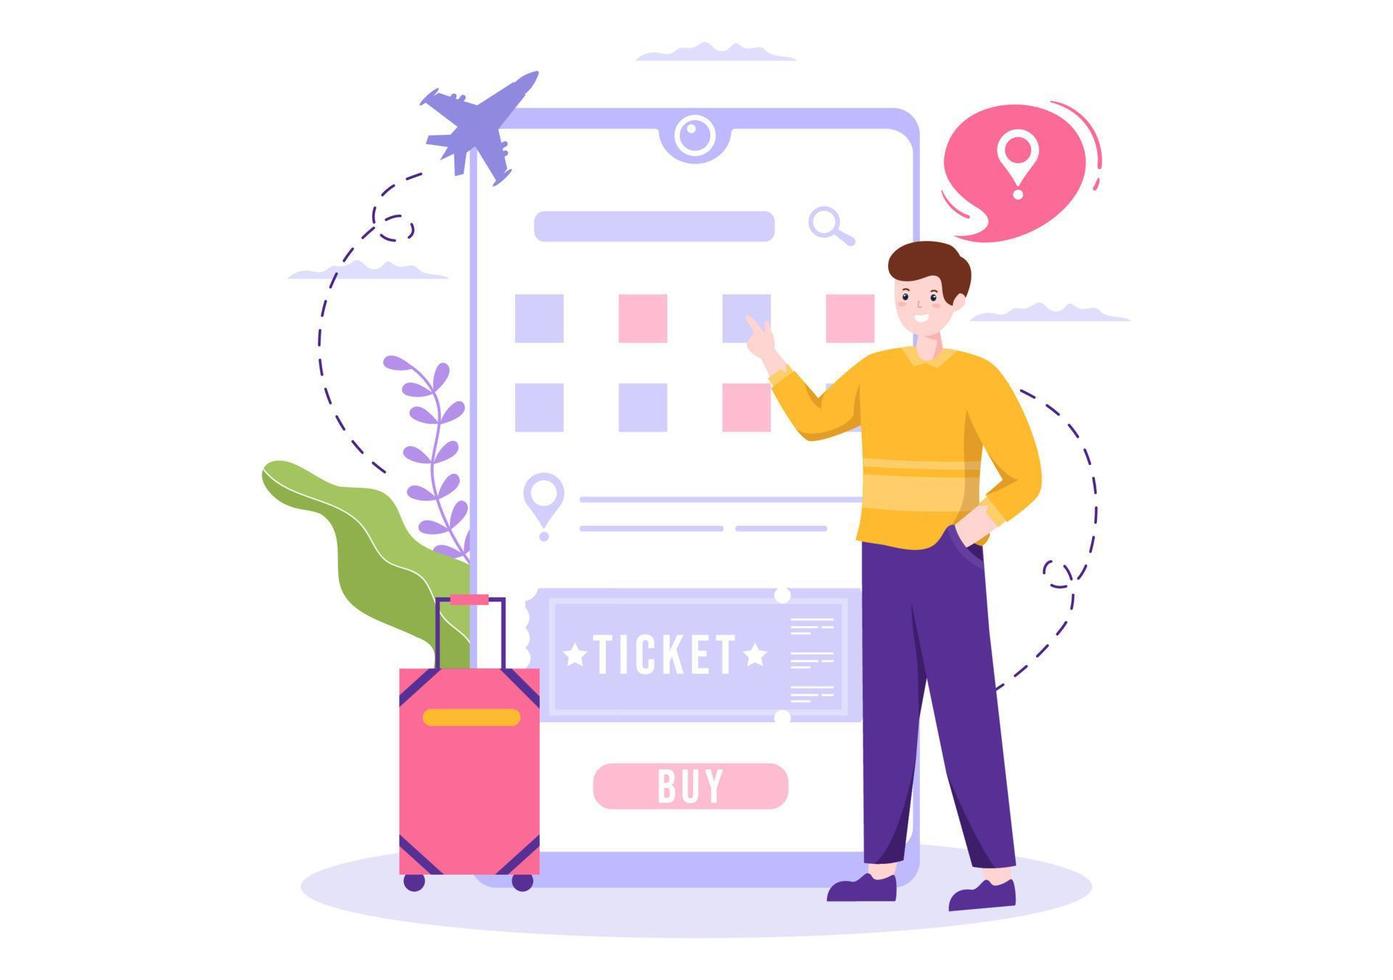 Ticket Travel Online Booking Service App on Smartphone Template Hand Drawn Cartoon Flat Illustration for Trip Planning vector